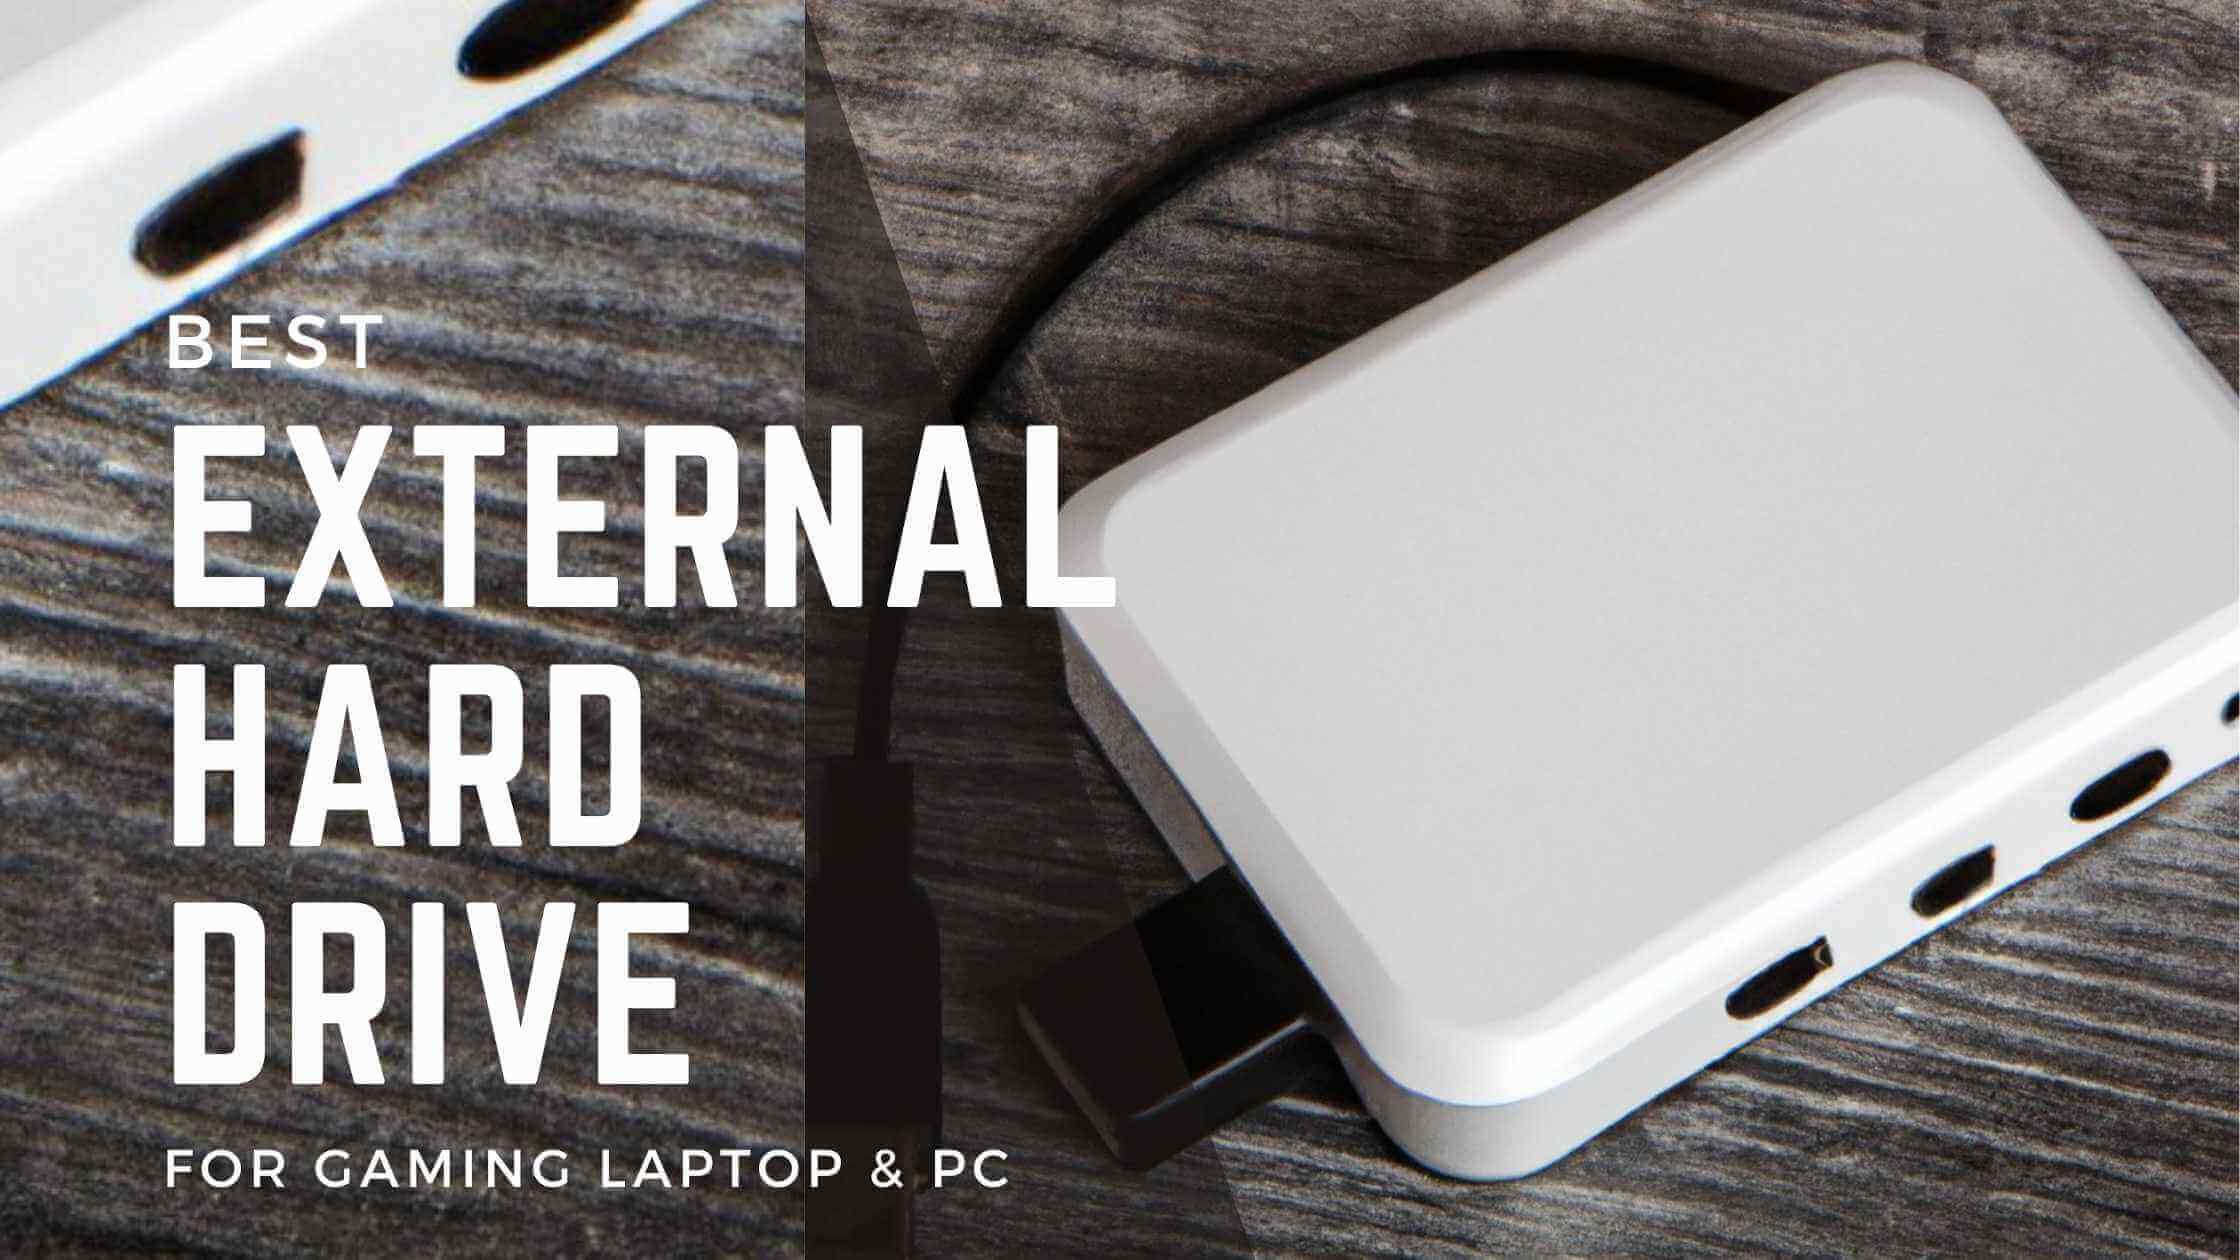 Best external hard drive for gaming laptop & PC